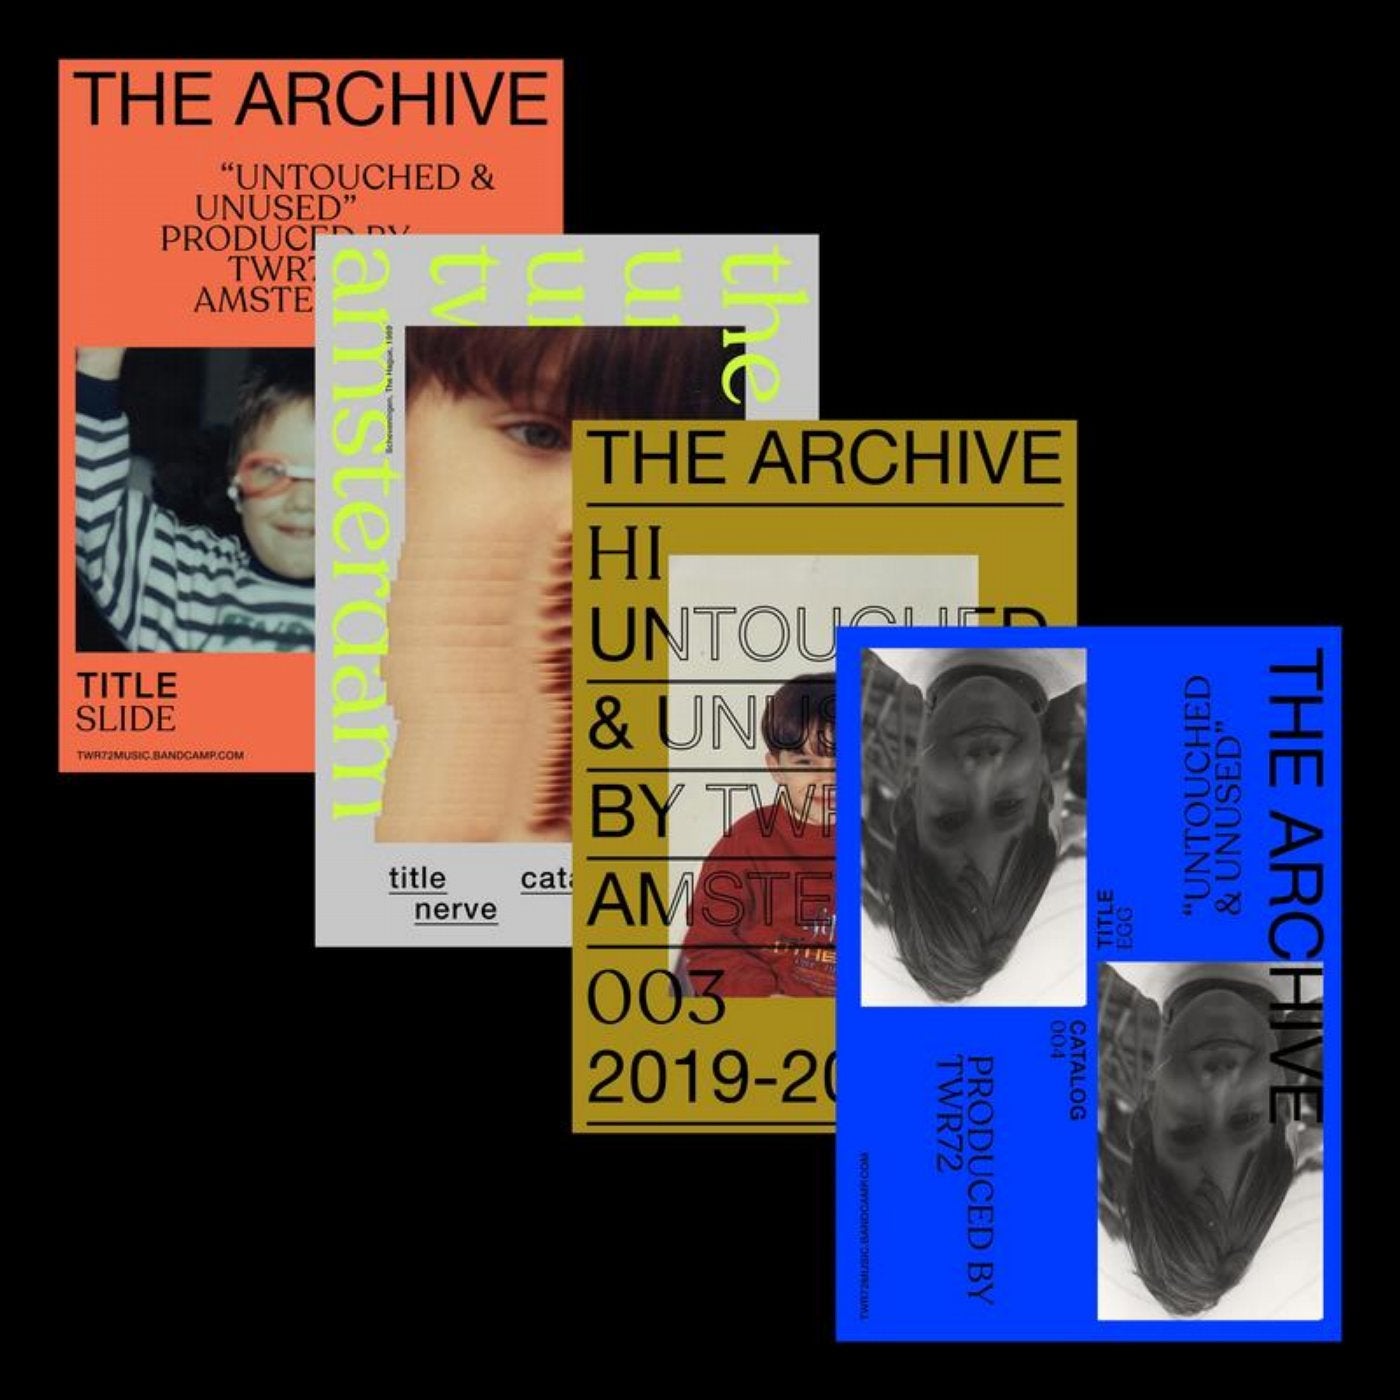 The Archive 1